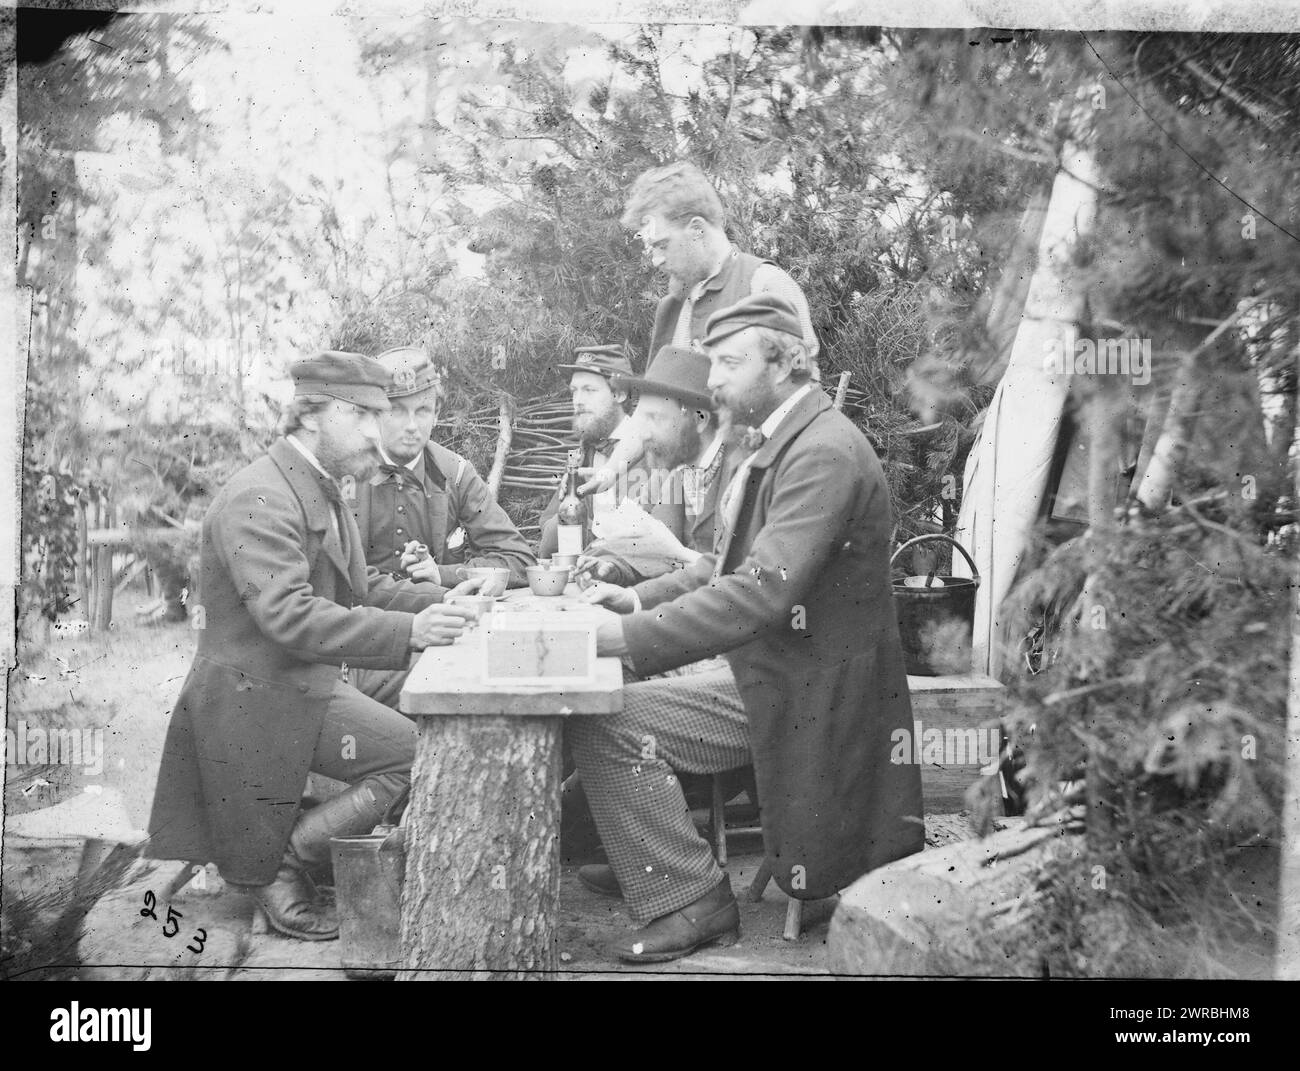 Yorktown, Virginia (vicinity). Comte de Paris, Duc de Chartres, Prince de Joinville and friends at lunch. Camp Winfield Scott, Gibson, James F., 1828-, photographer, 1862 May 1., United States, History, Civil War, 1861-1865, Glass negatives, 1860-1870, Stereographs, 1860-1870, 1 negative: glass, stereograph, wet collodion, 4 x 10 in Stock Photo